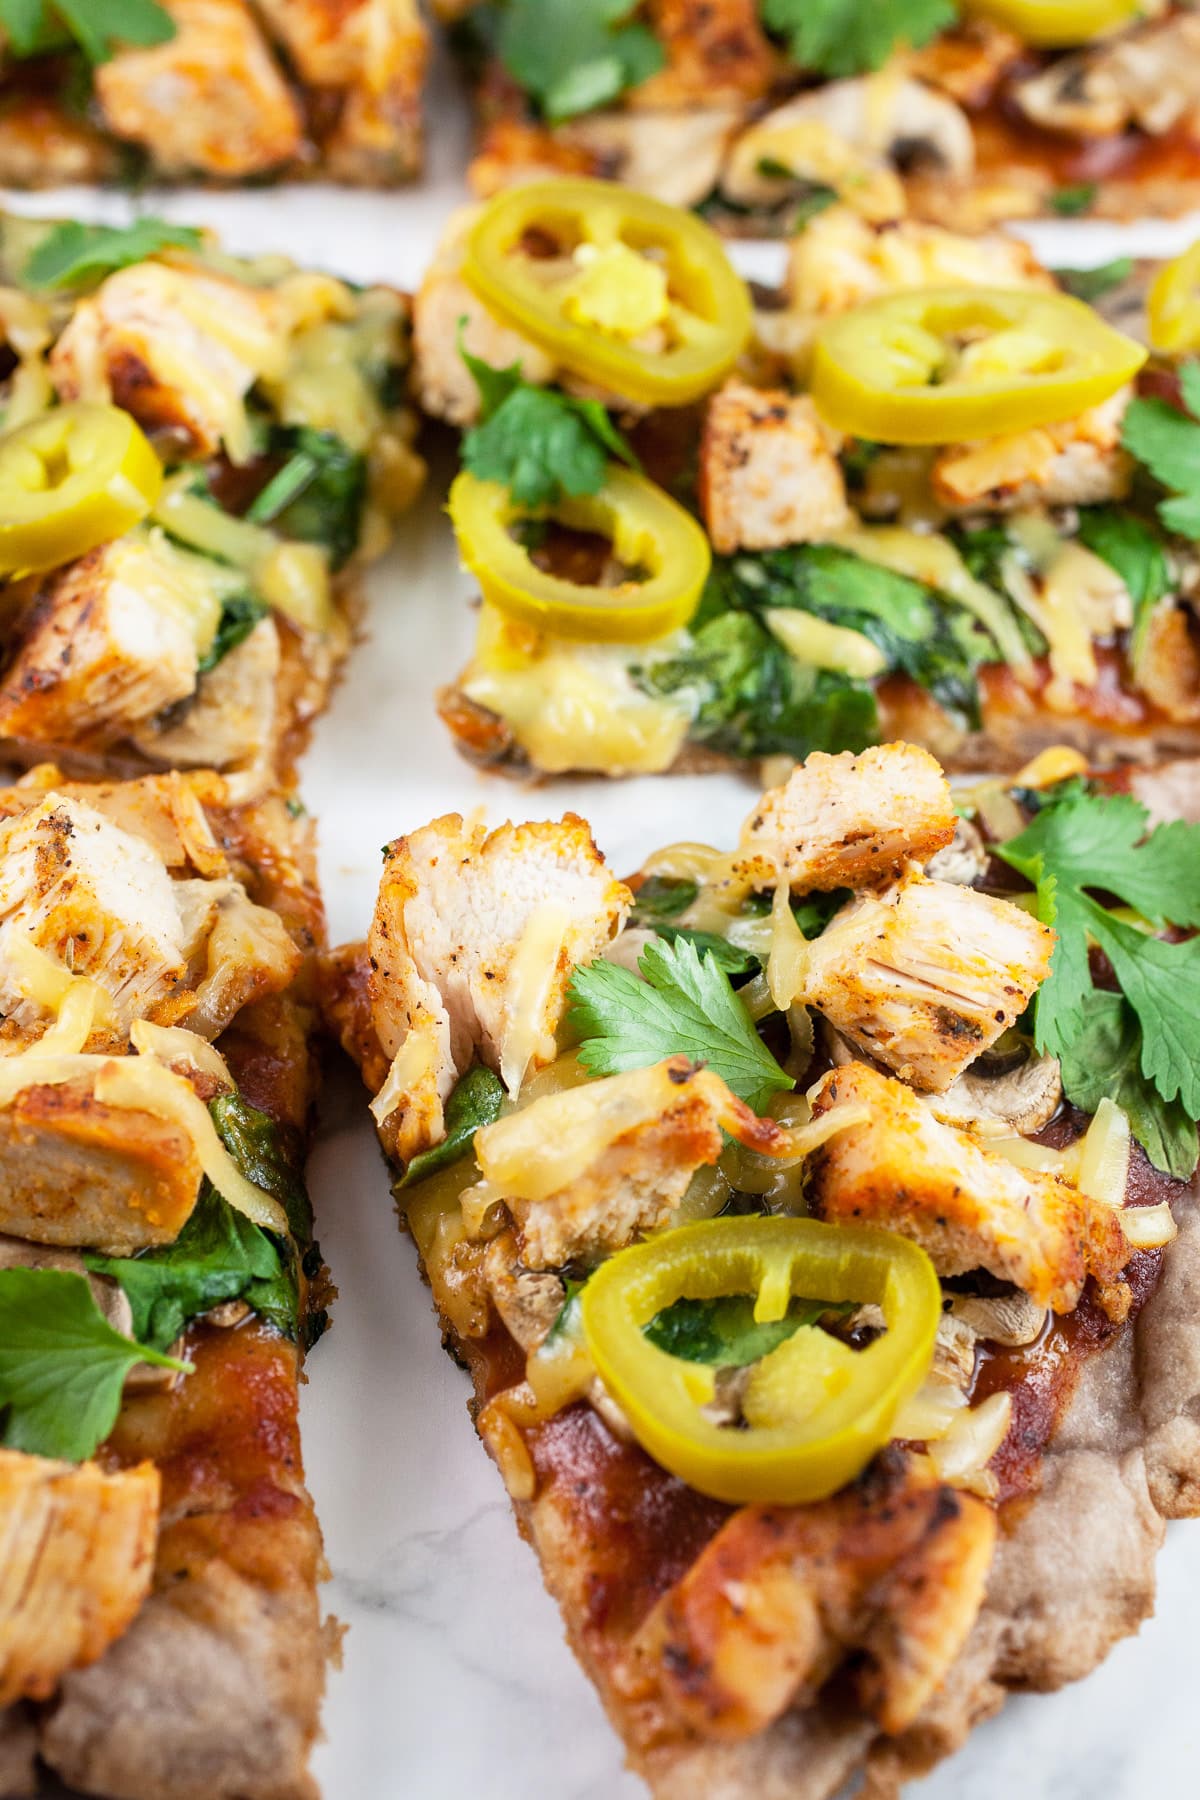 BBQ chicken pizza with pickled jalapenos cut into slices.